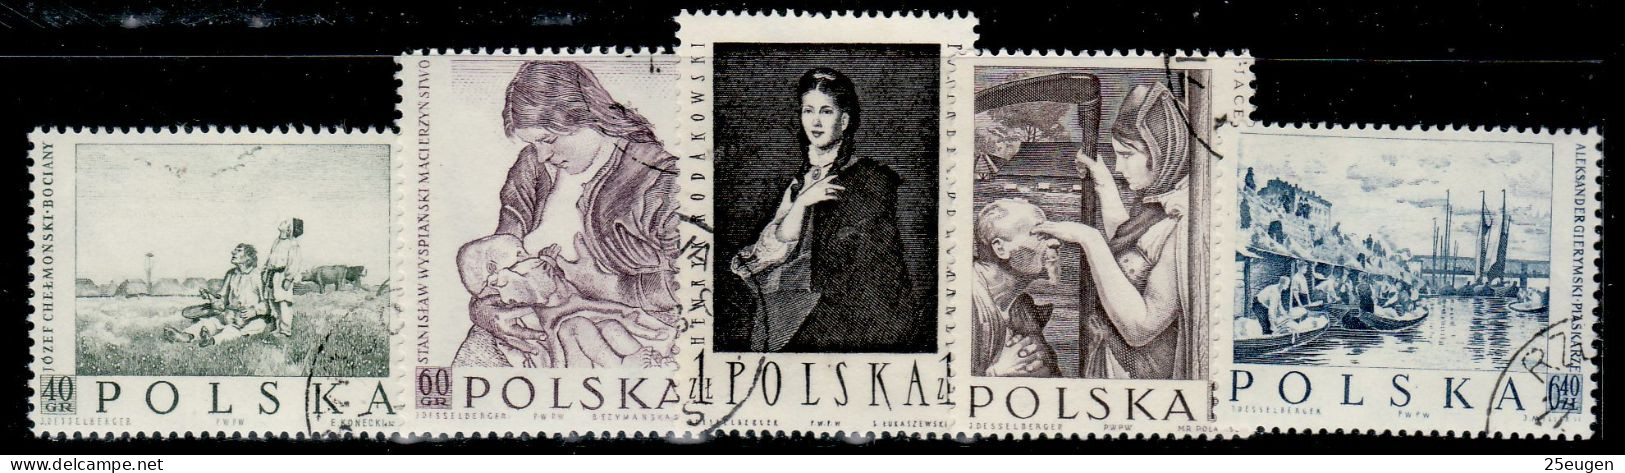 POLAND 1959 MICHEL No: 1102 - 1106 USED - Used Stamps